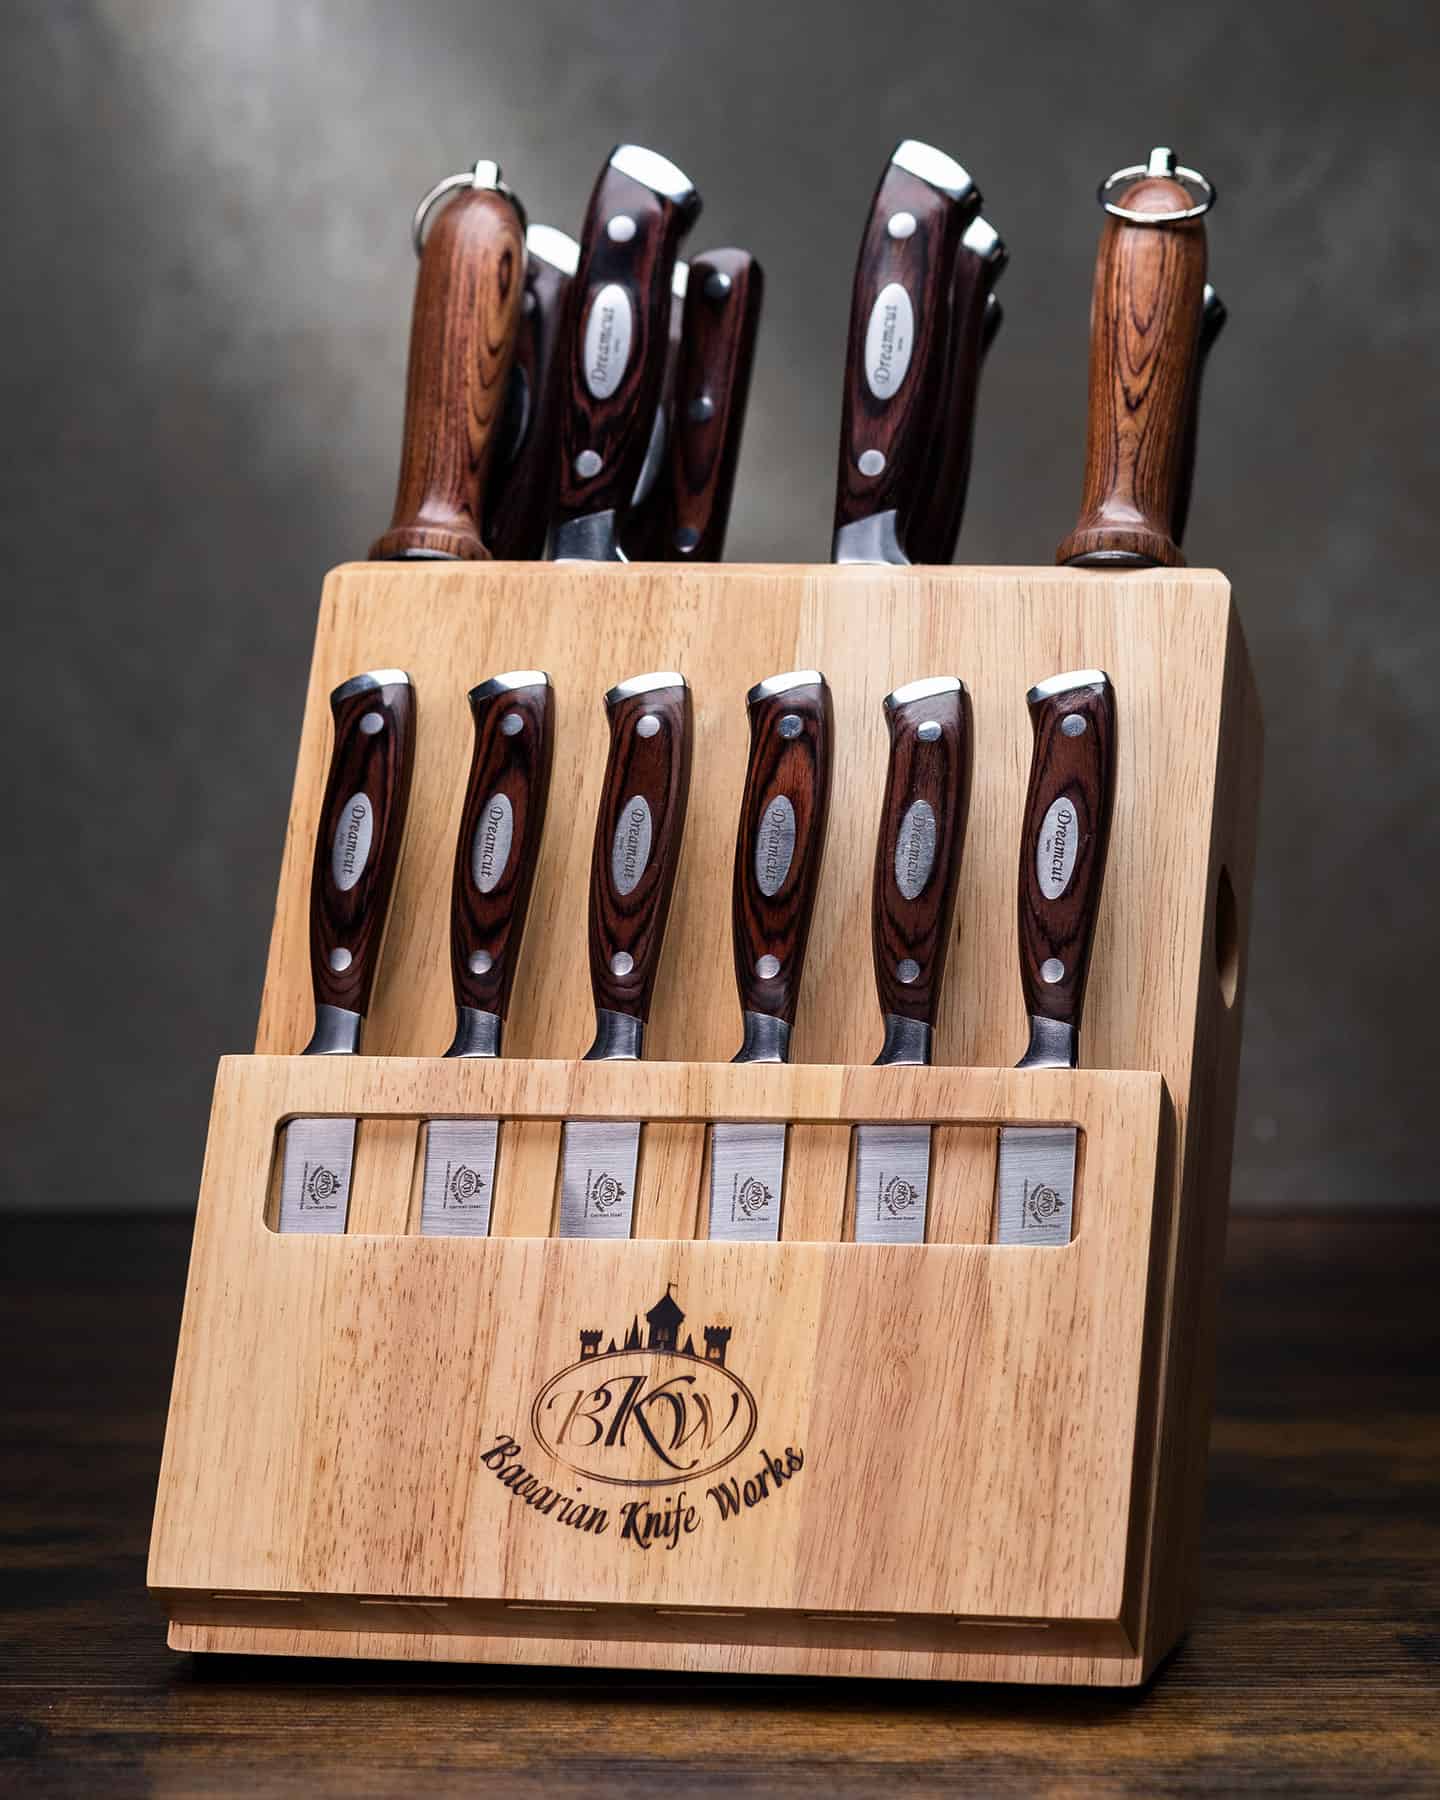 Each knife included in the Bavarian Knife Works 19-Piece Dreamcut set actually feels like it has a different, essential use.